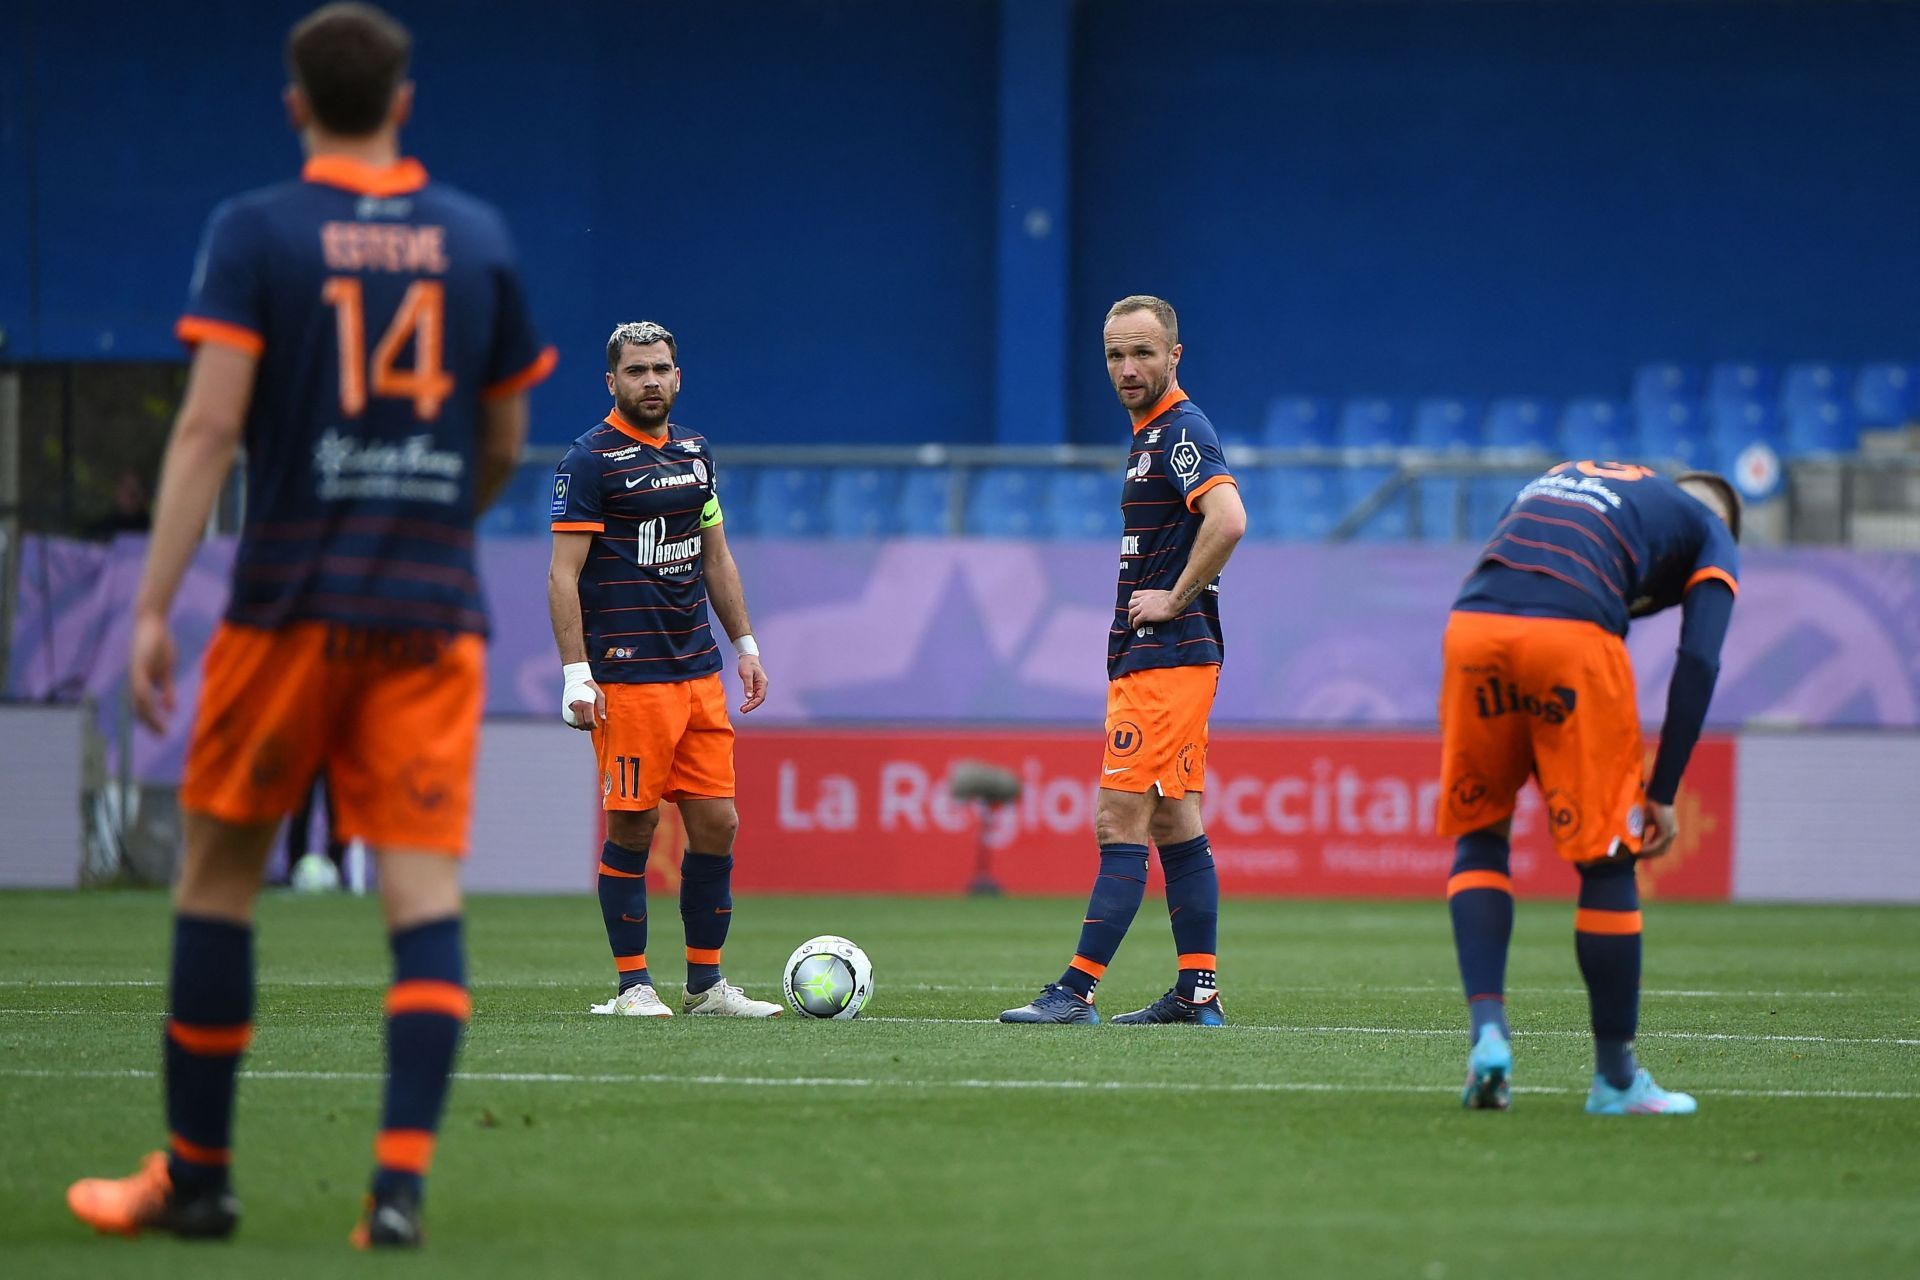 Montpellier will host Auxerre on Sunday - Ligue 1